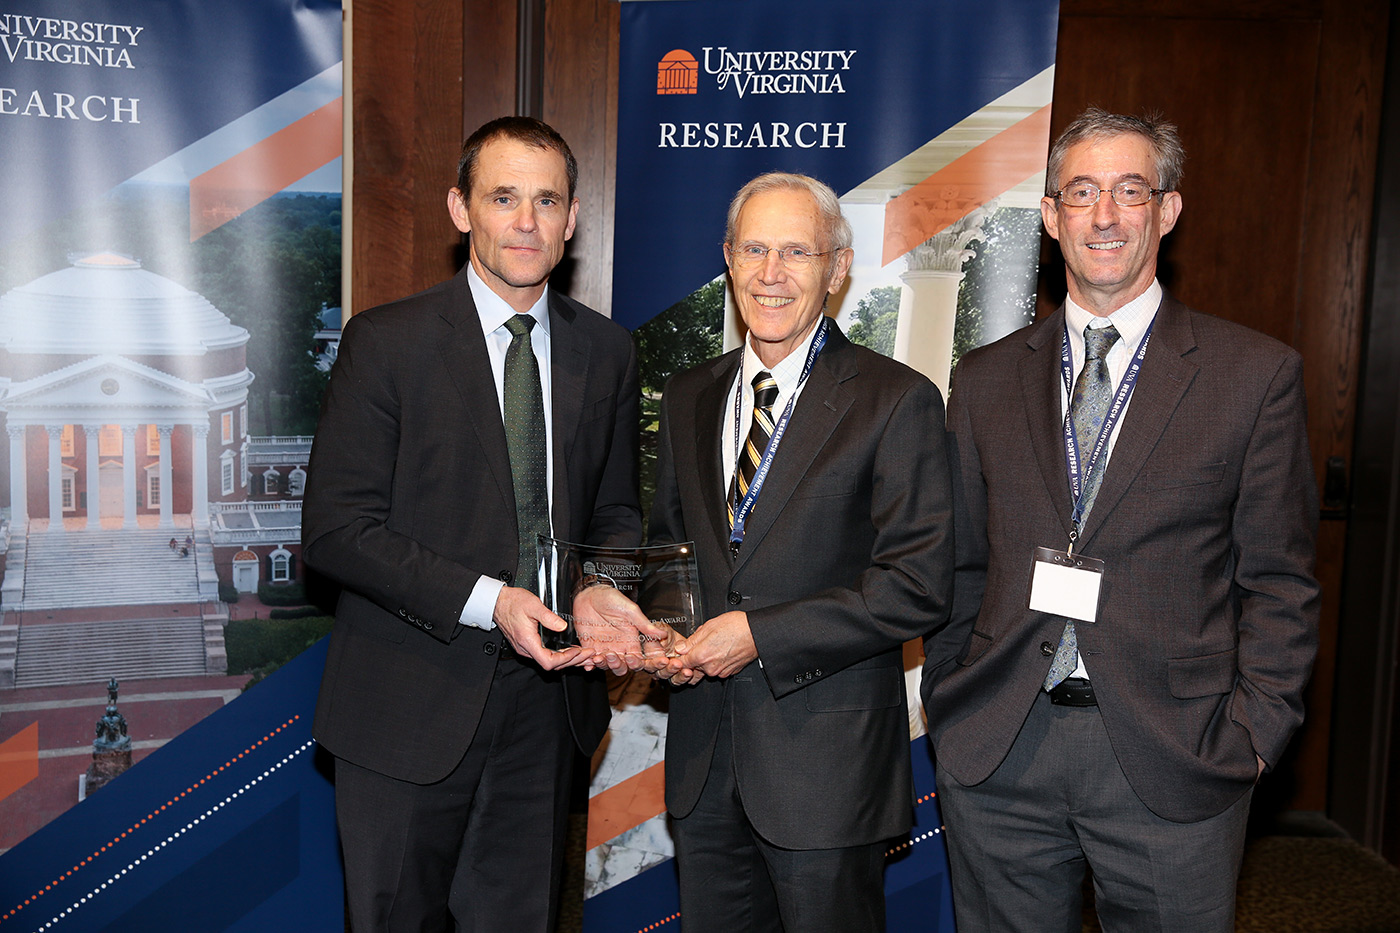 From left to right: President Jim Ryan, Senior Associate Dean Don Brown and Interim Vice President for Research Fred Epstein.